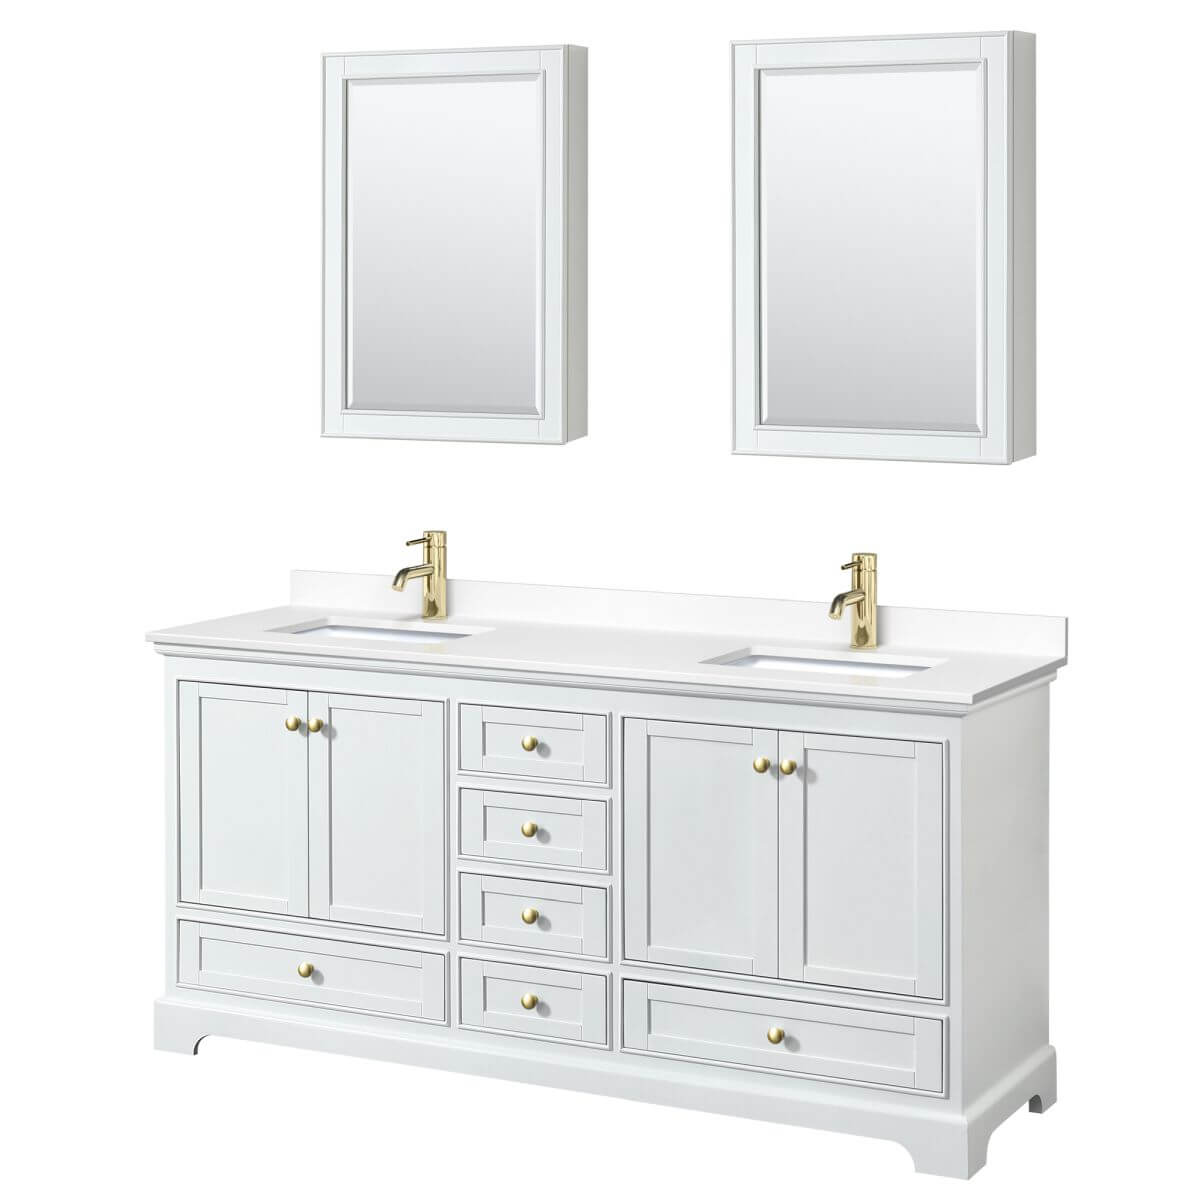 Wyndham Collection Deborah 72 inch Double Bathroom Vanity in White with White Cultured Marble Countertop, Undermount Square Sinks, Brushed Gold Trim and Medicine Cabinets - WCS202072DWGWCUNSMED